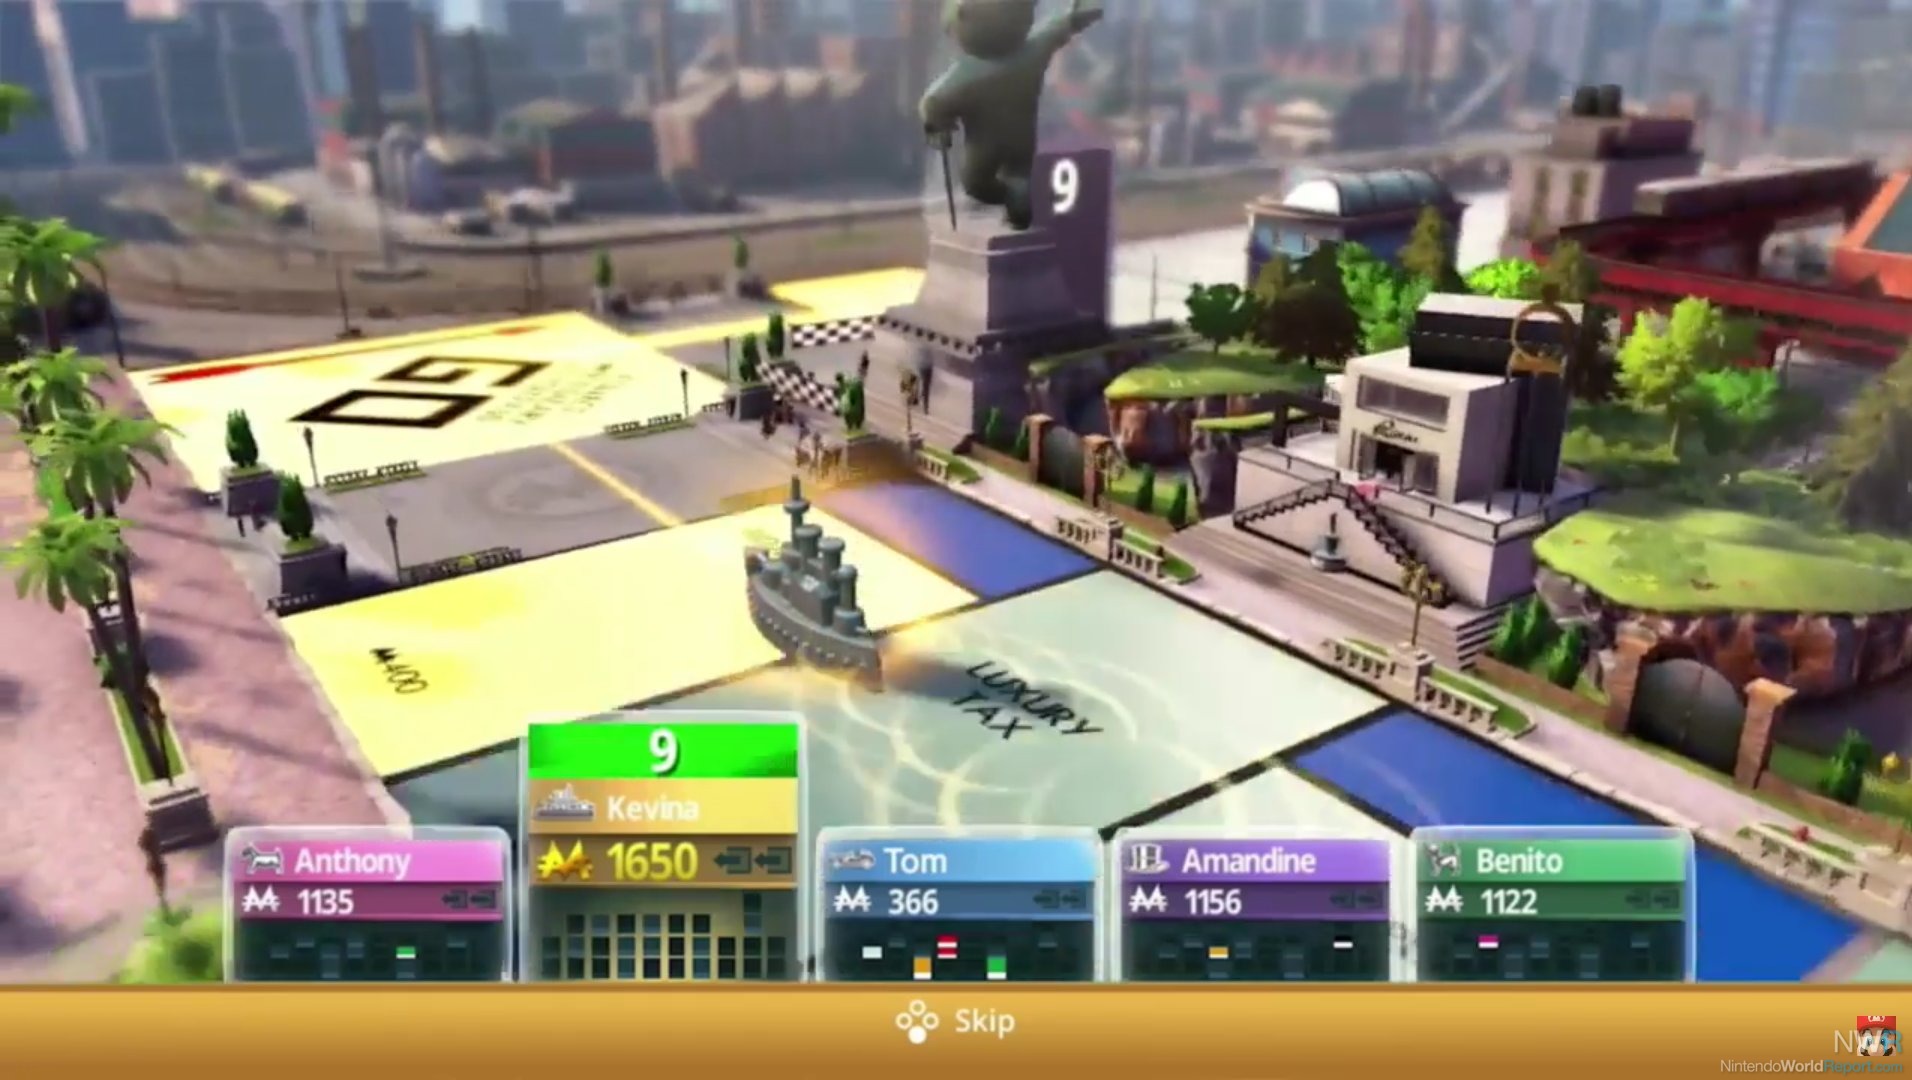 Monopoly for Nintendo Switch Review - Review - Nintendo World Report